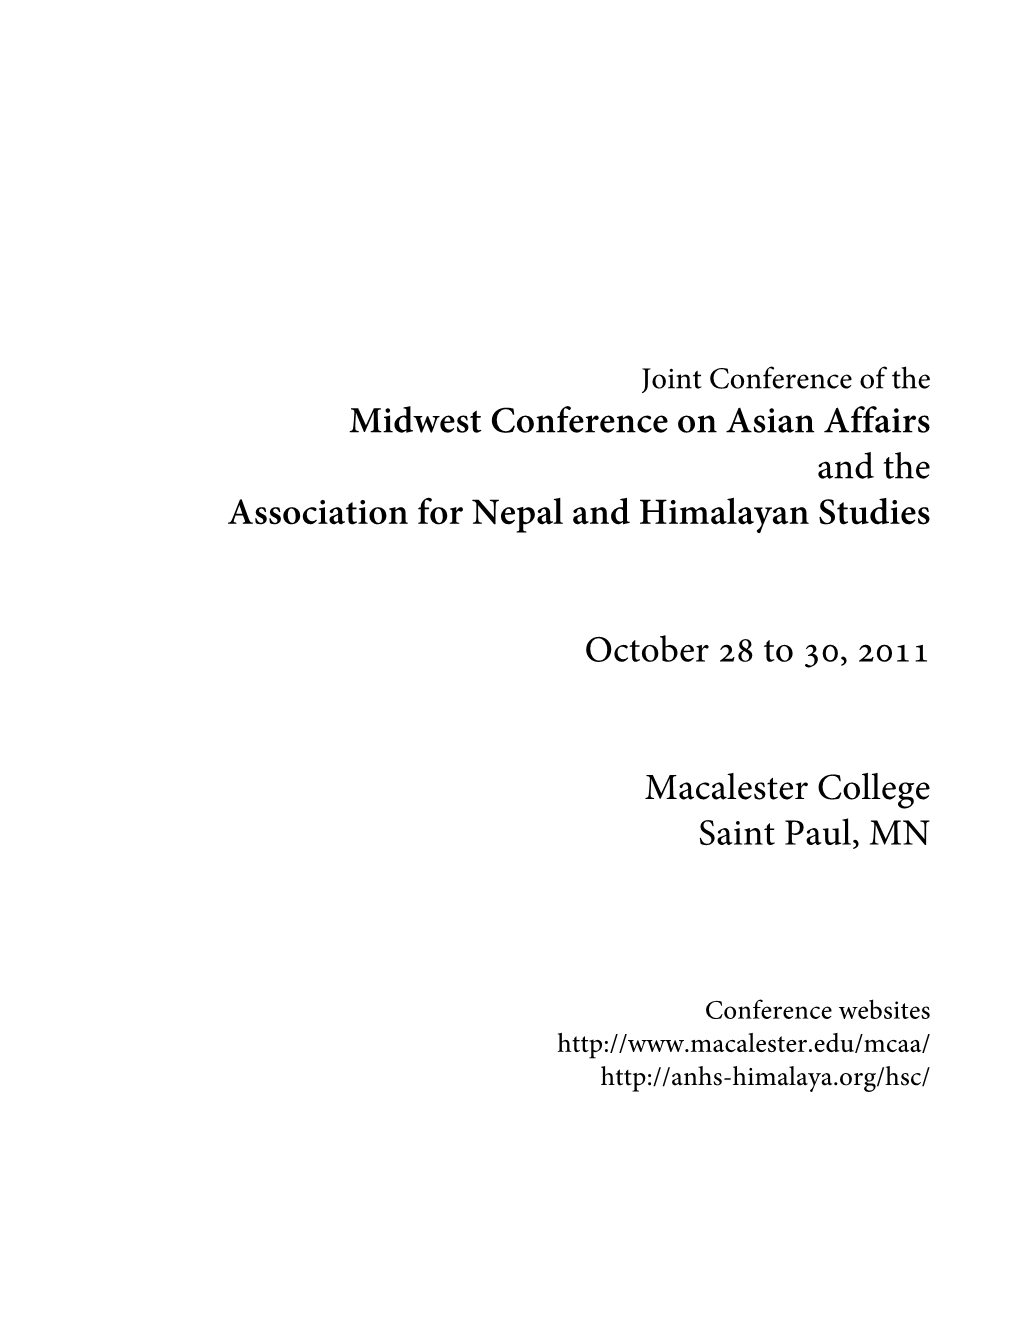 Midwest Conference on Asian Affairs and the Association for Nepal and Himalayan Studies